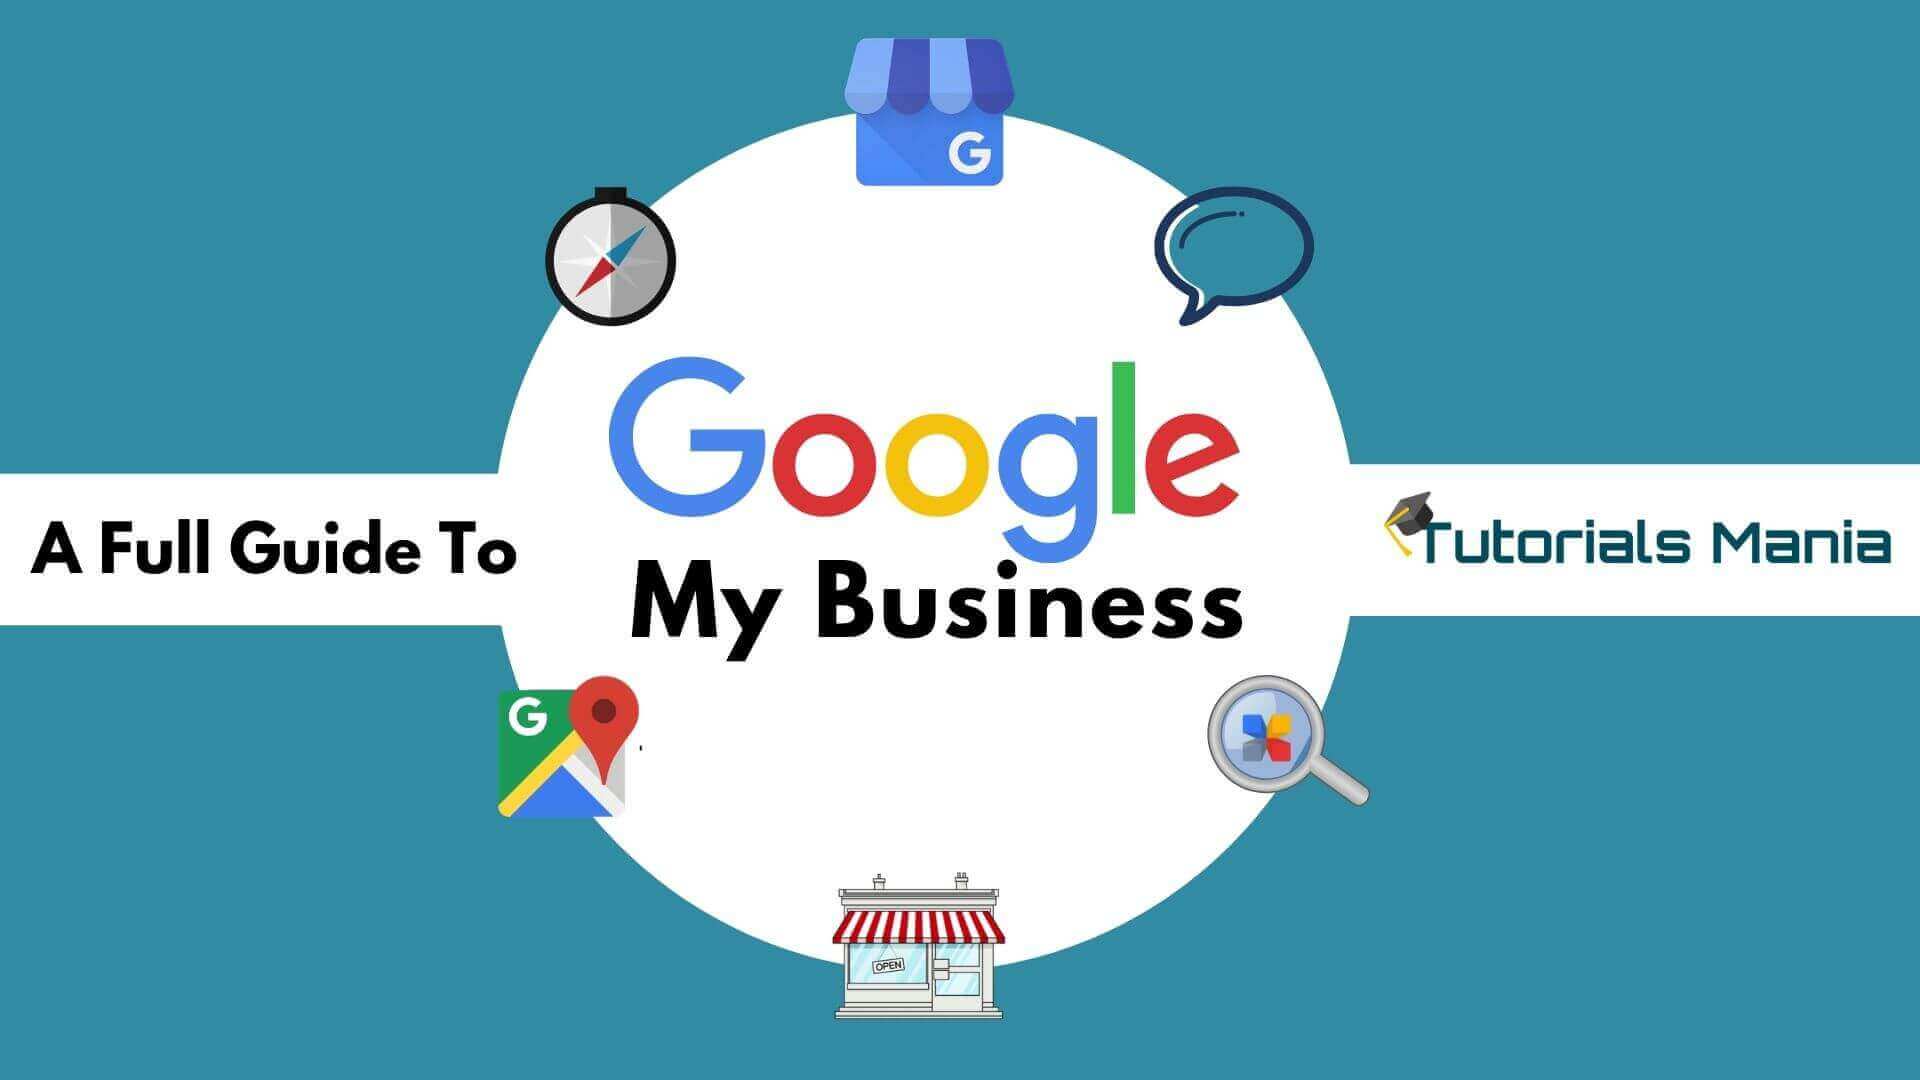 Google My Business An Ultimate Guide to Get Started With GMB